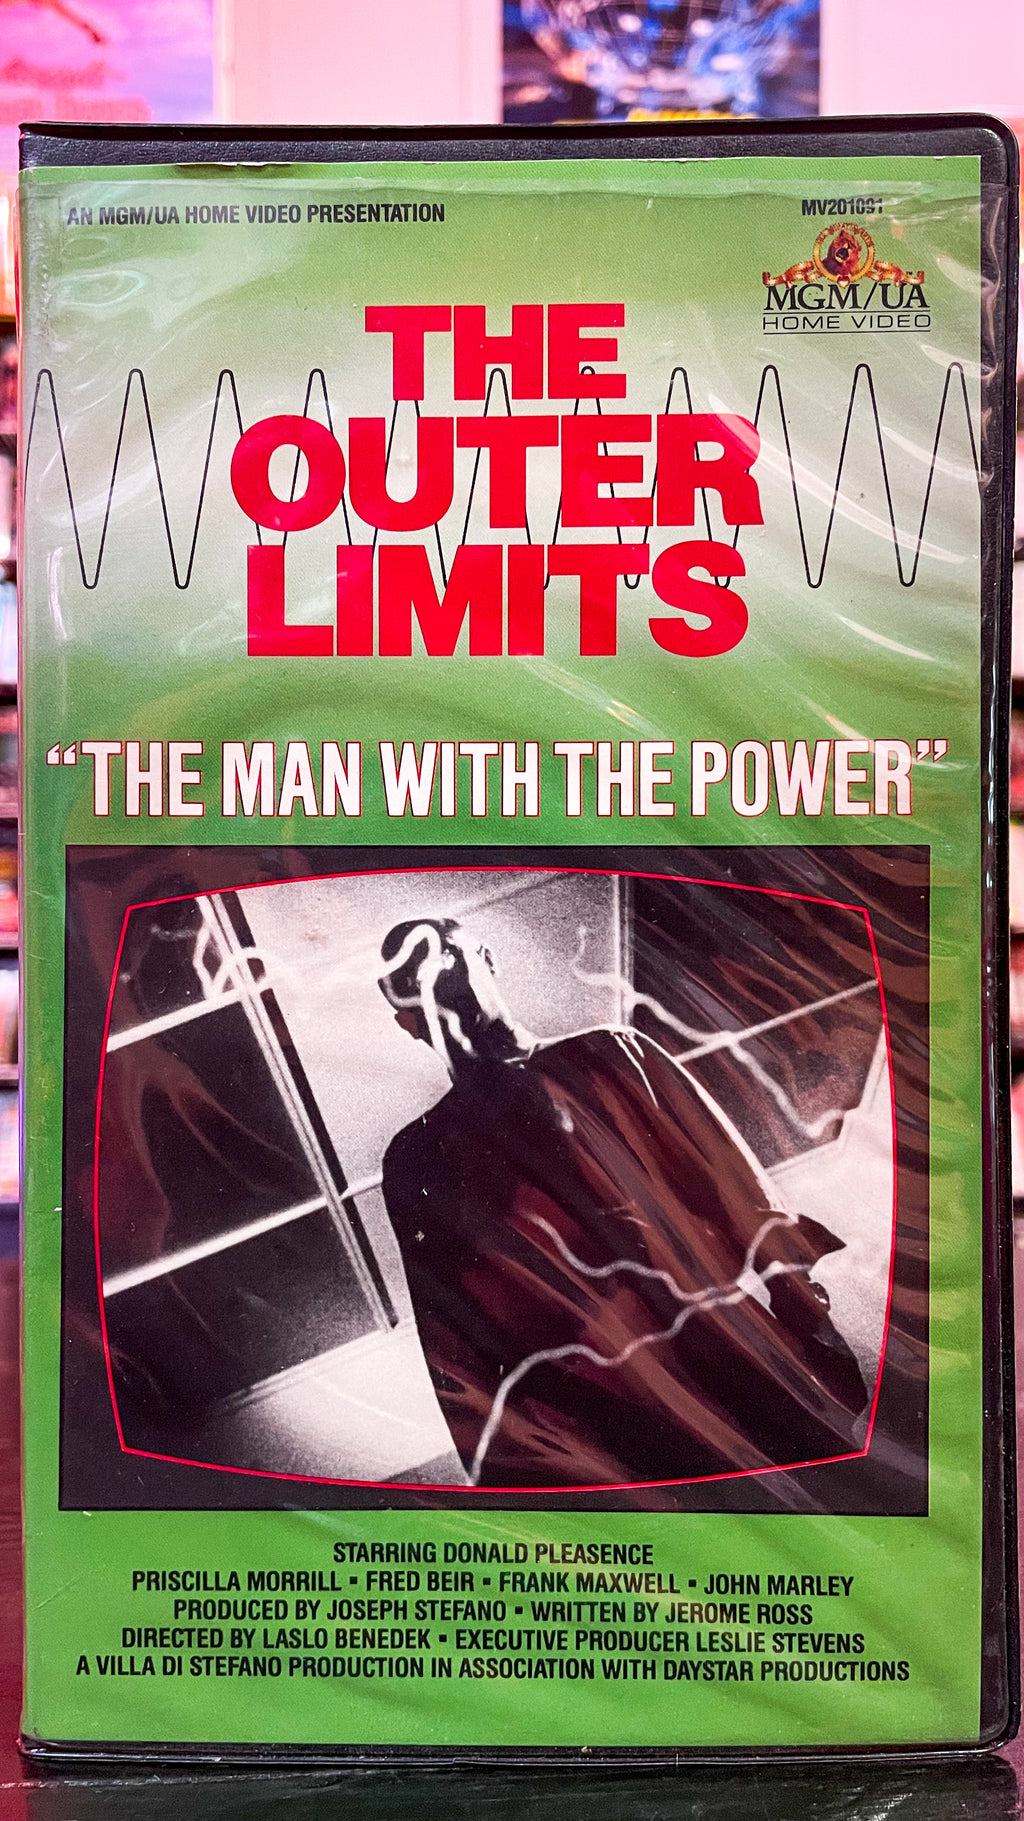 The Outer Limits: "The Man With The Power"